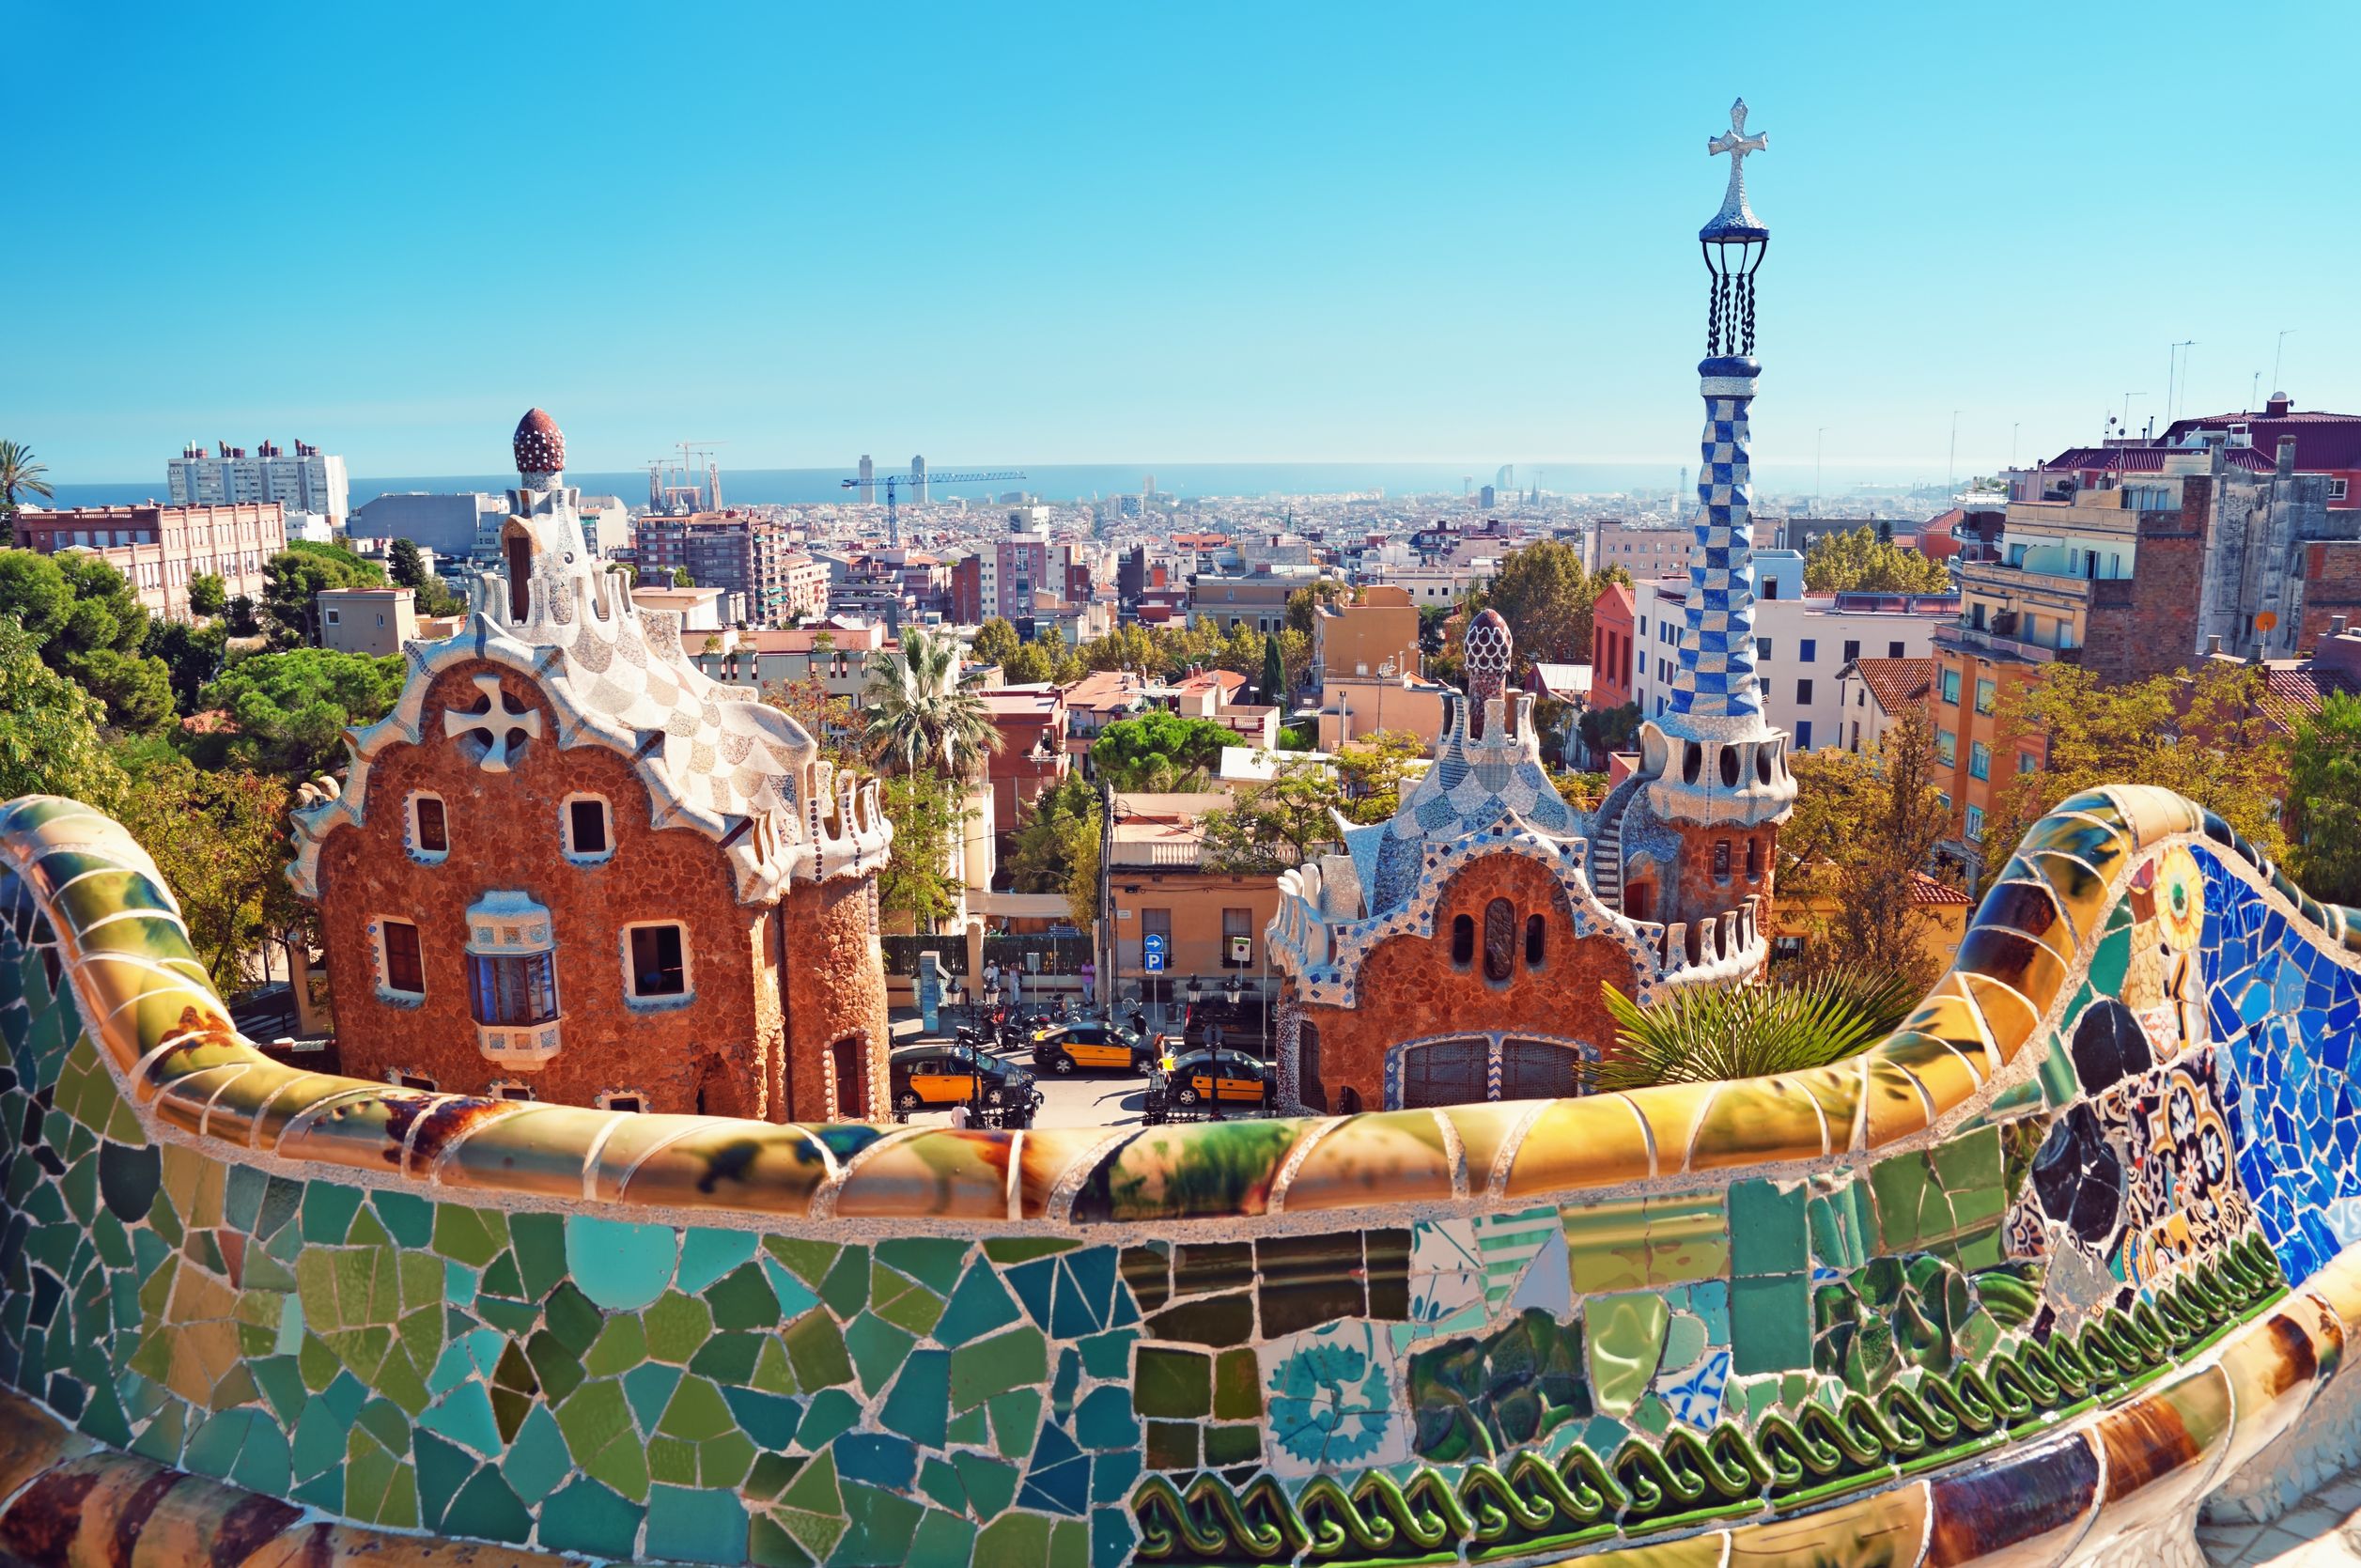 Parc guell photo